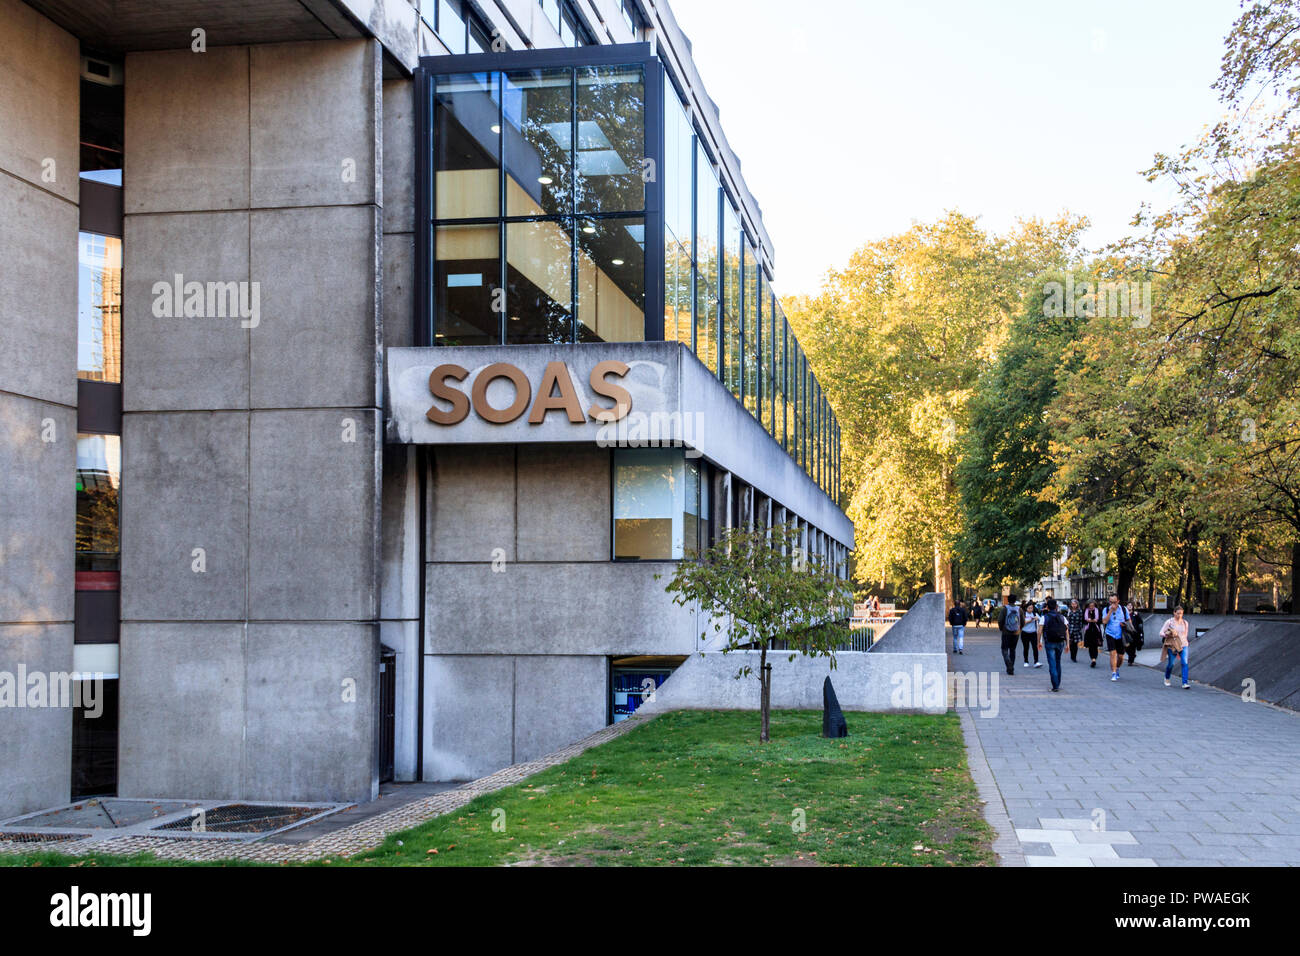 SOAS (the School of African and Oriental Studies), University of London, from Thornhaugh Street, London, UK Stock Photo